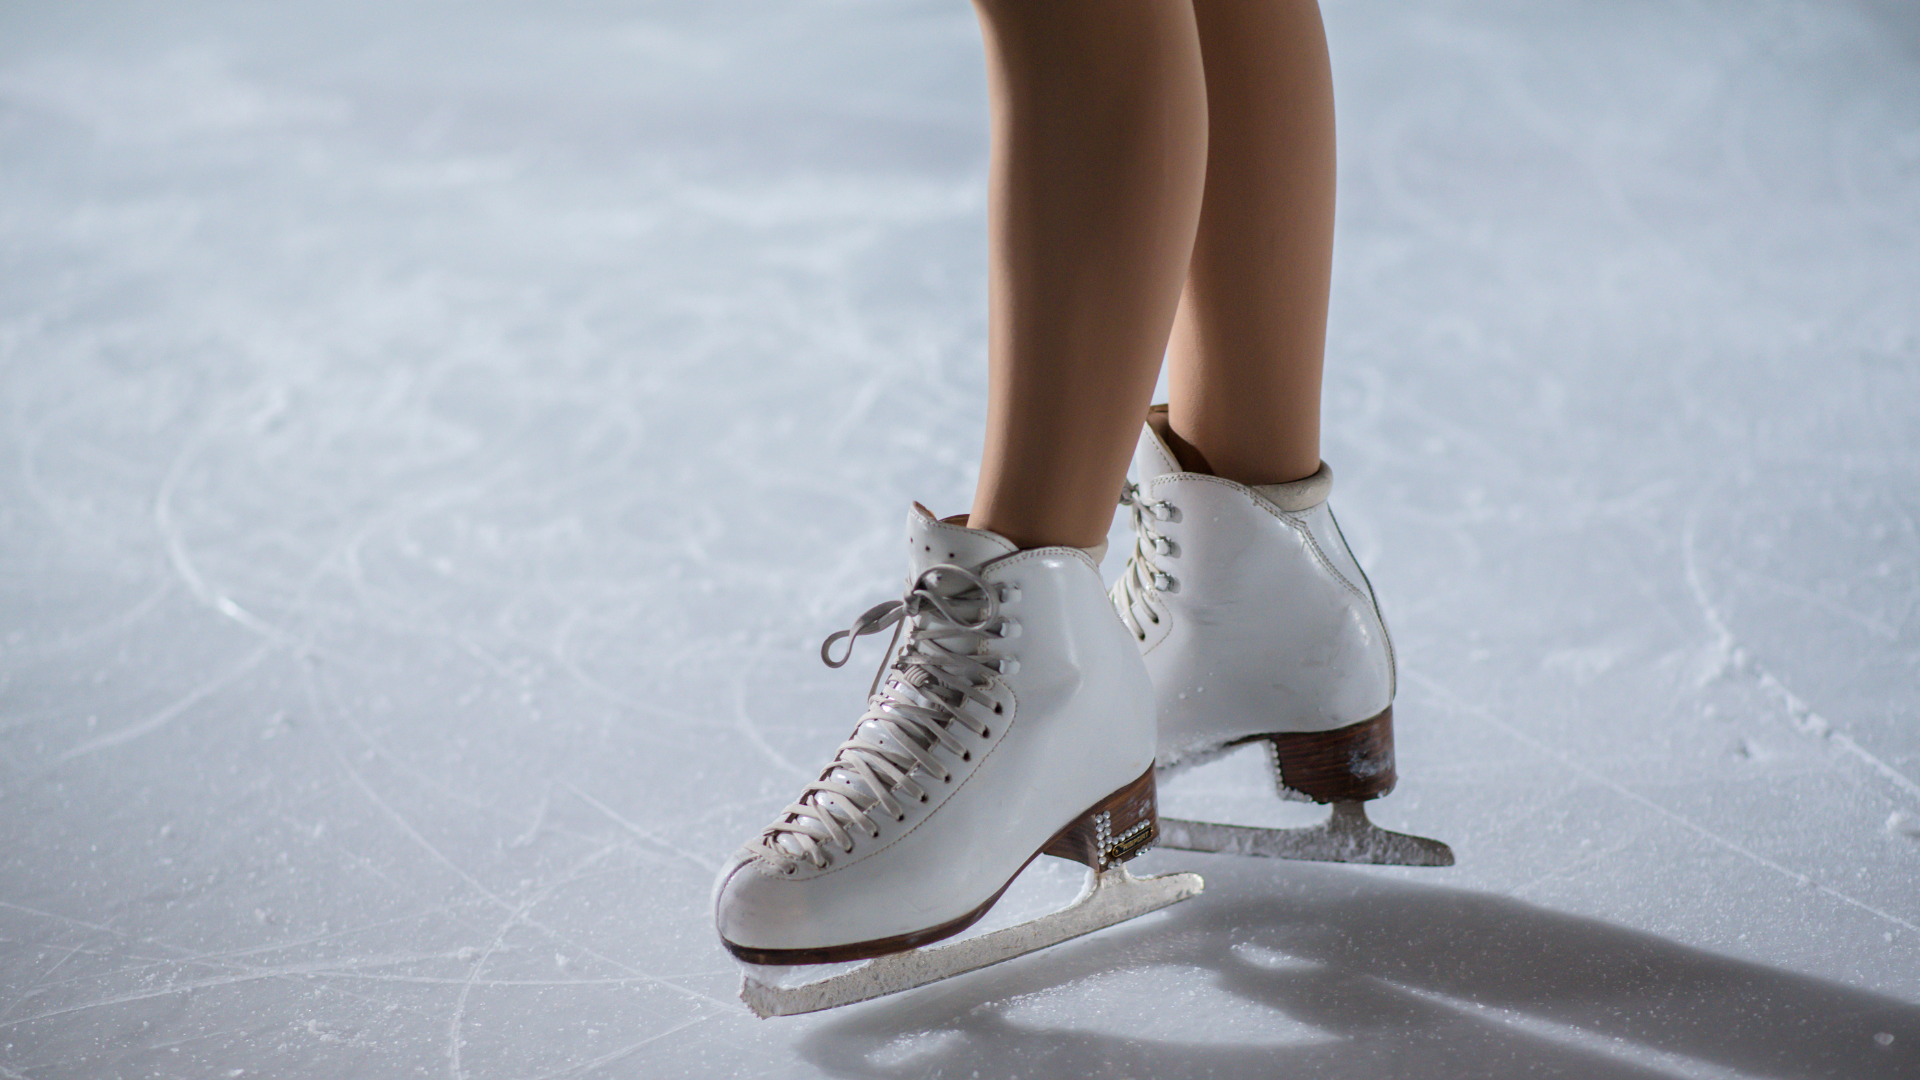 a person wearing white figure skates on ice